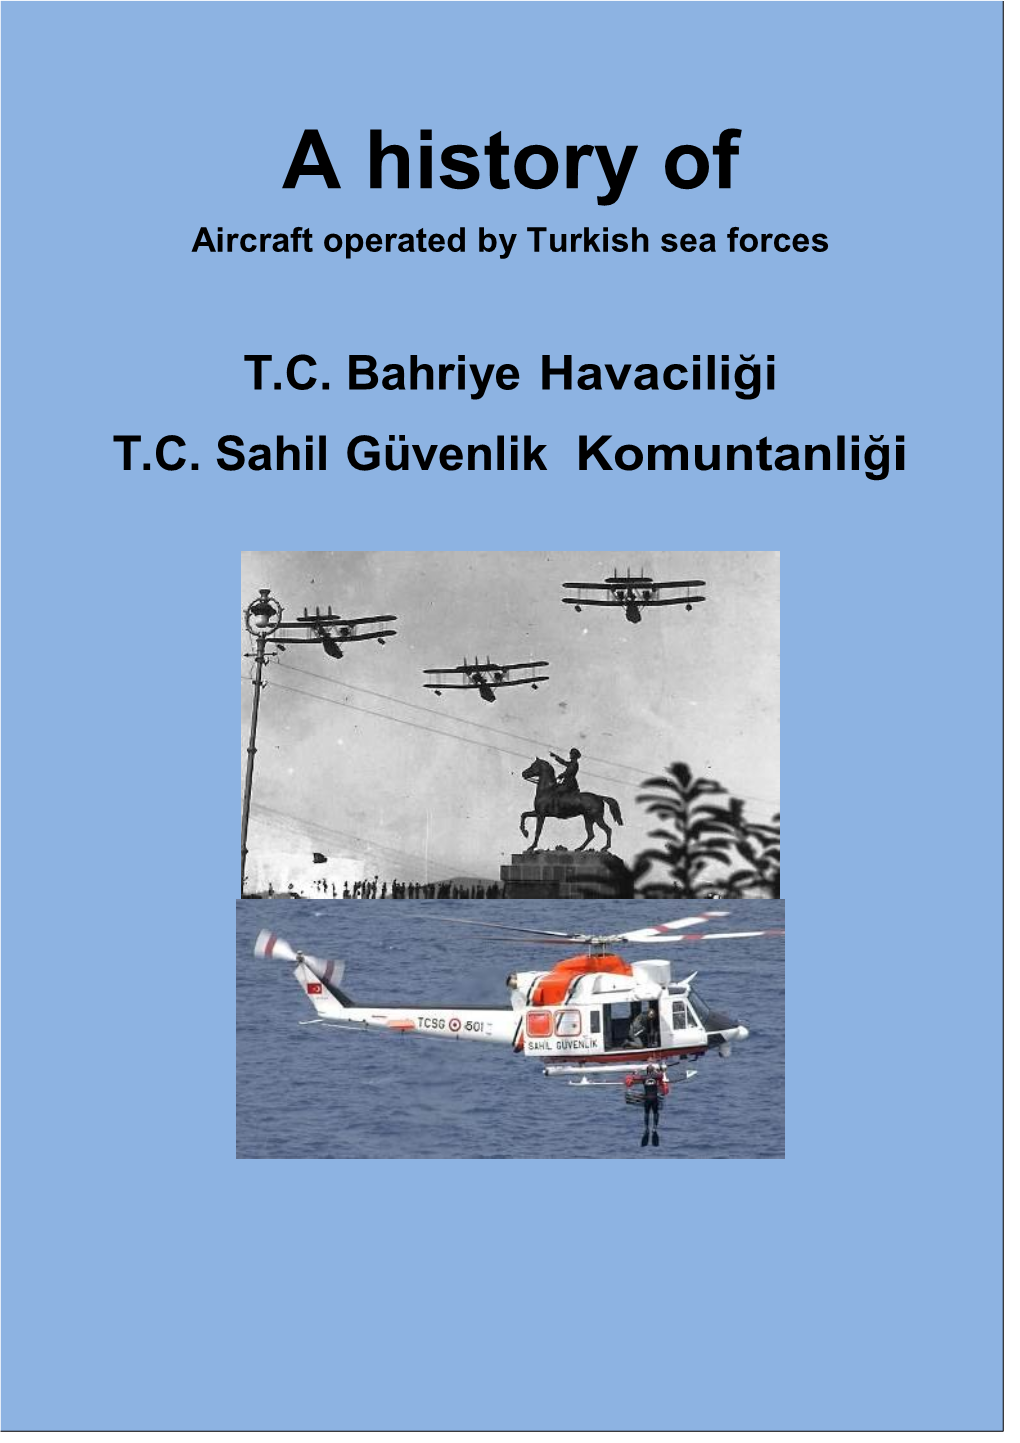 Aircraft of Turkish Sea Forces